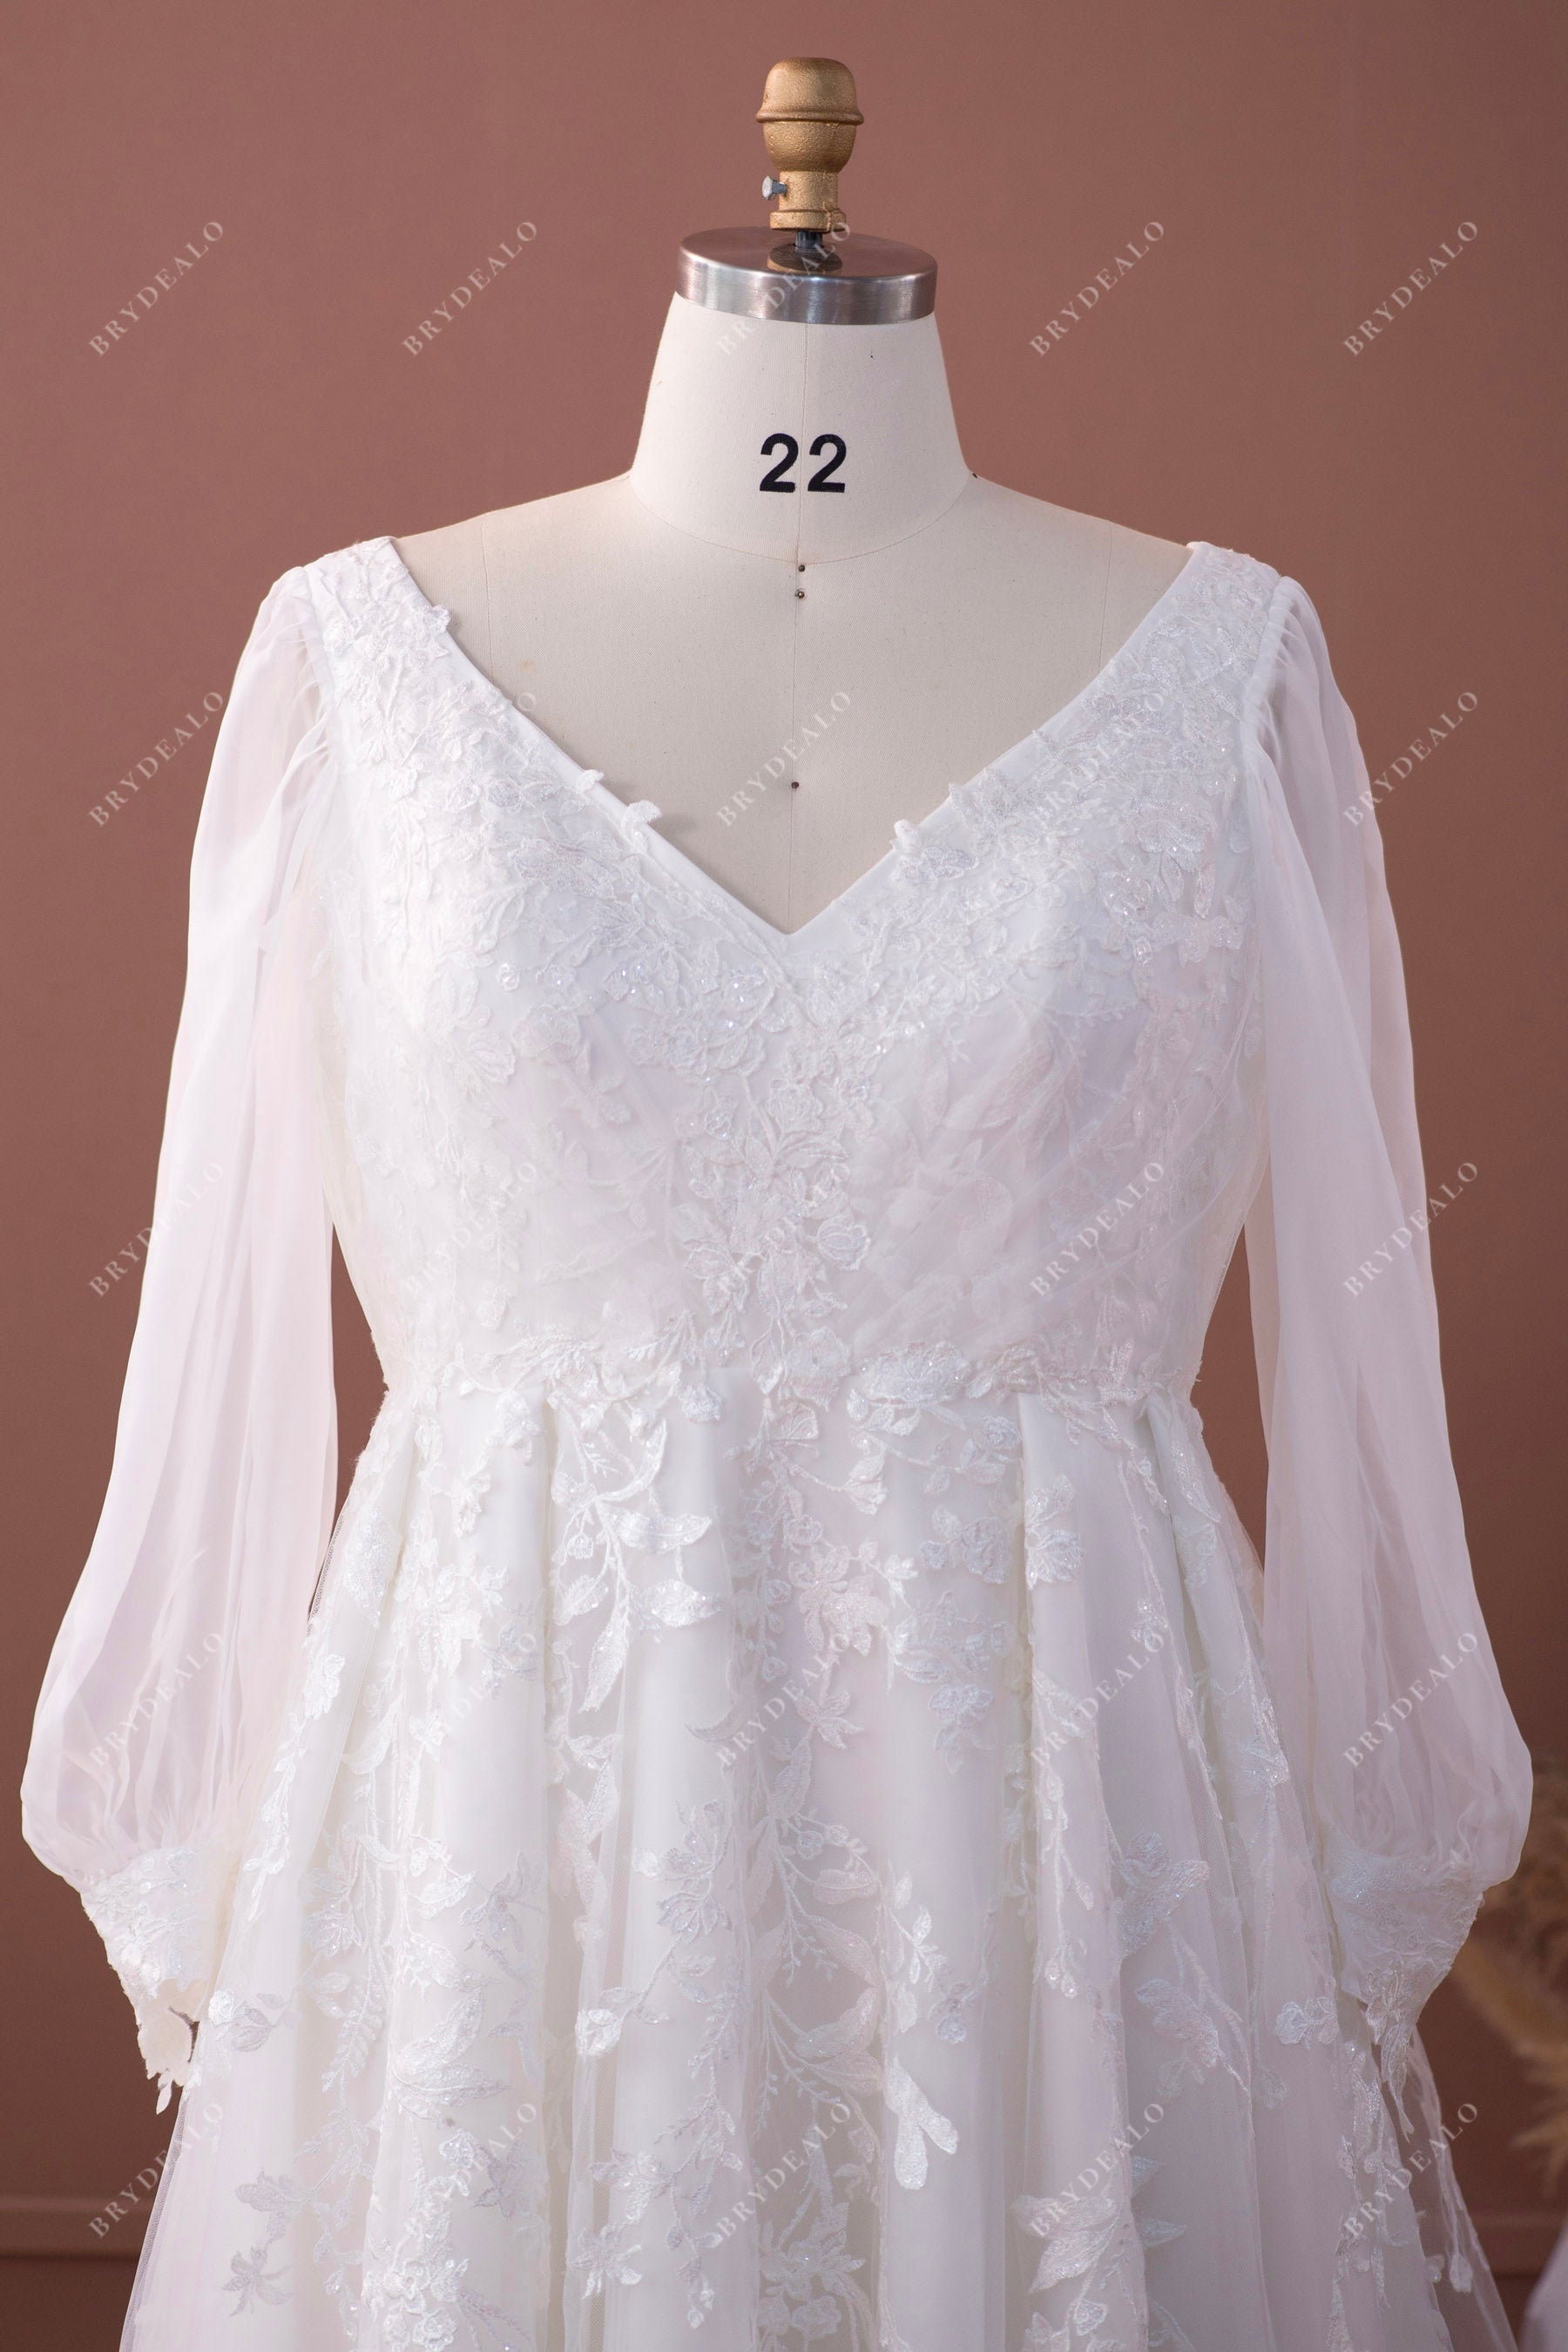 V-neck sheer long sleeves plus size summer wedding gown